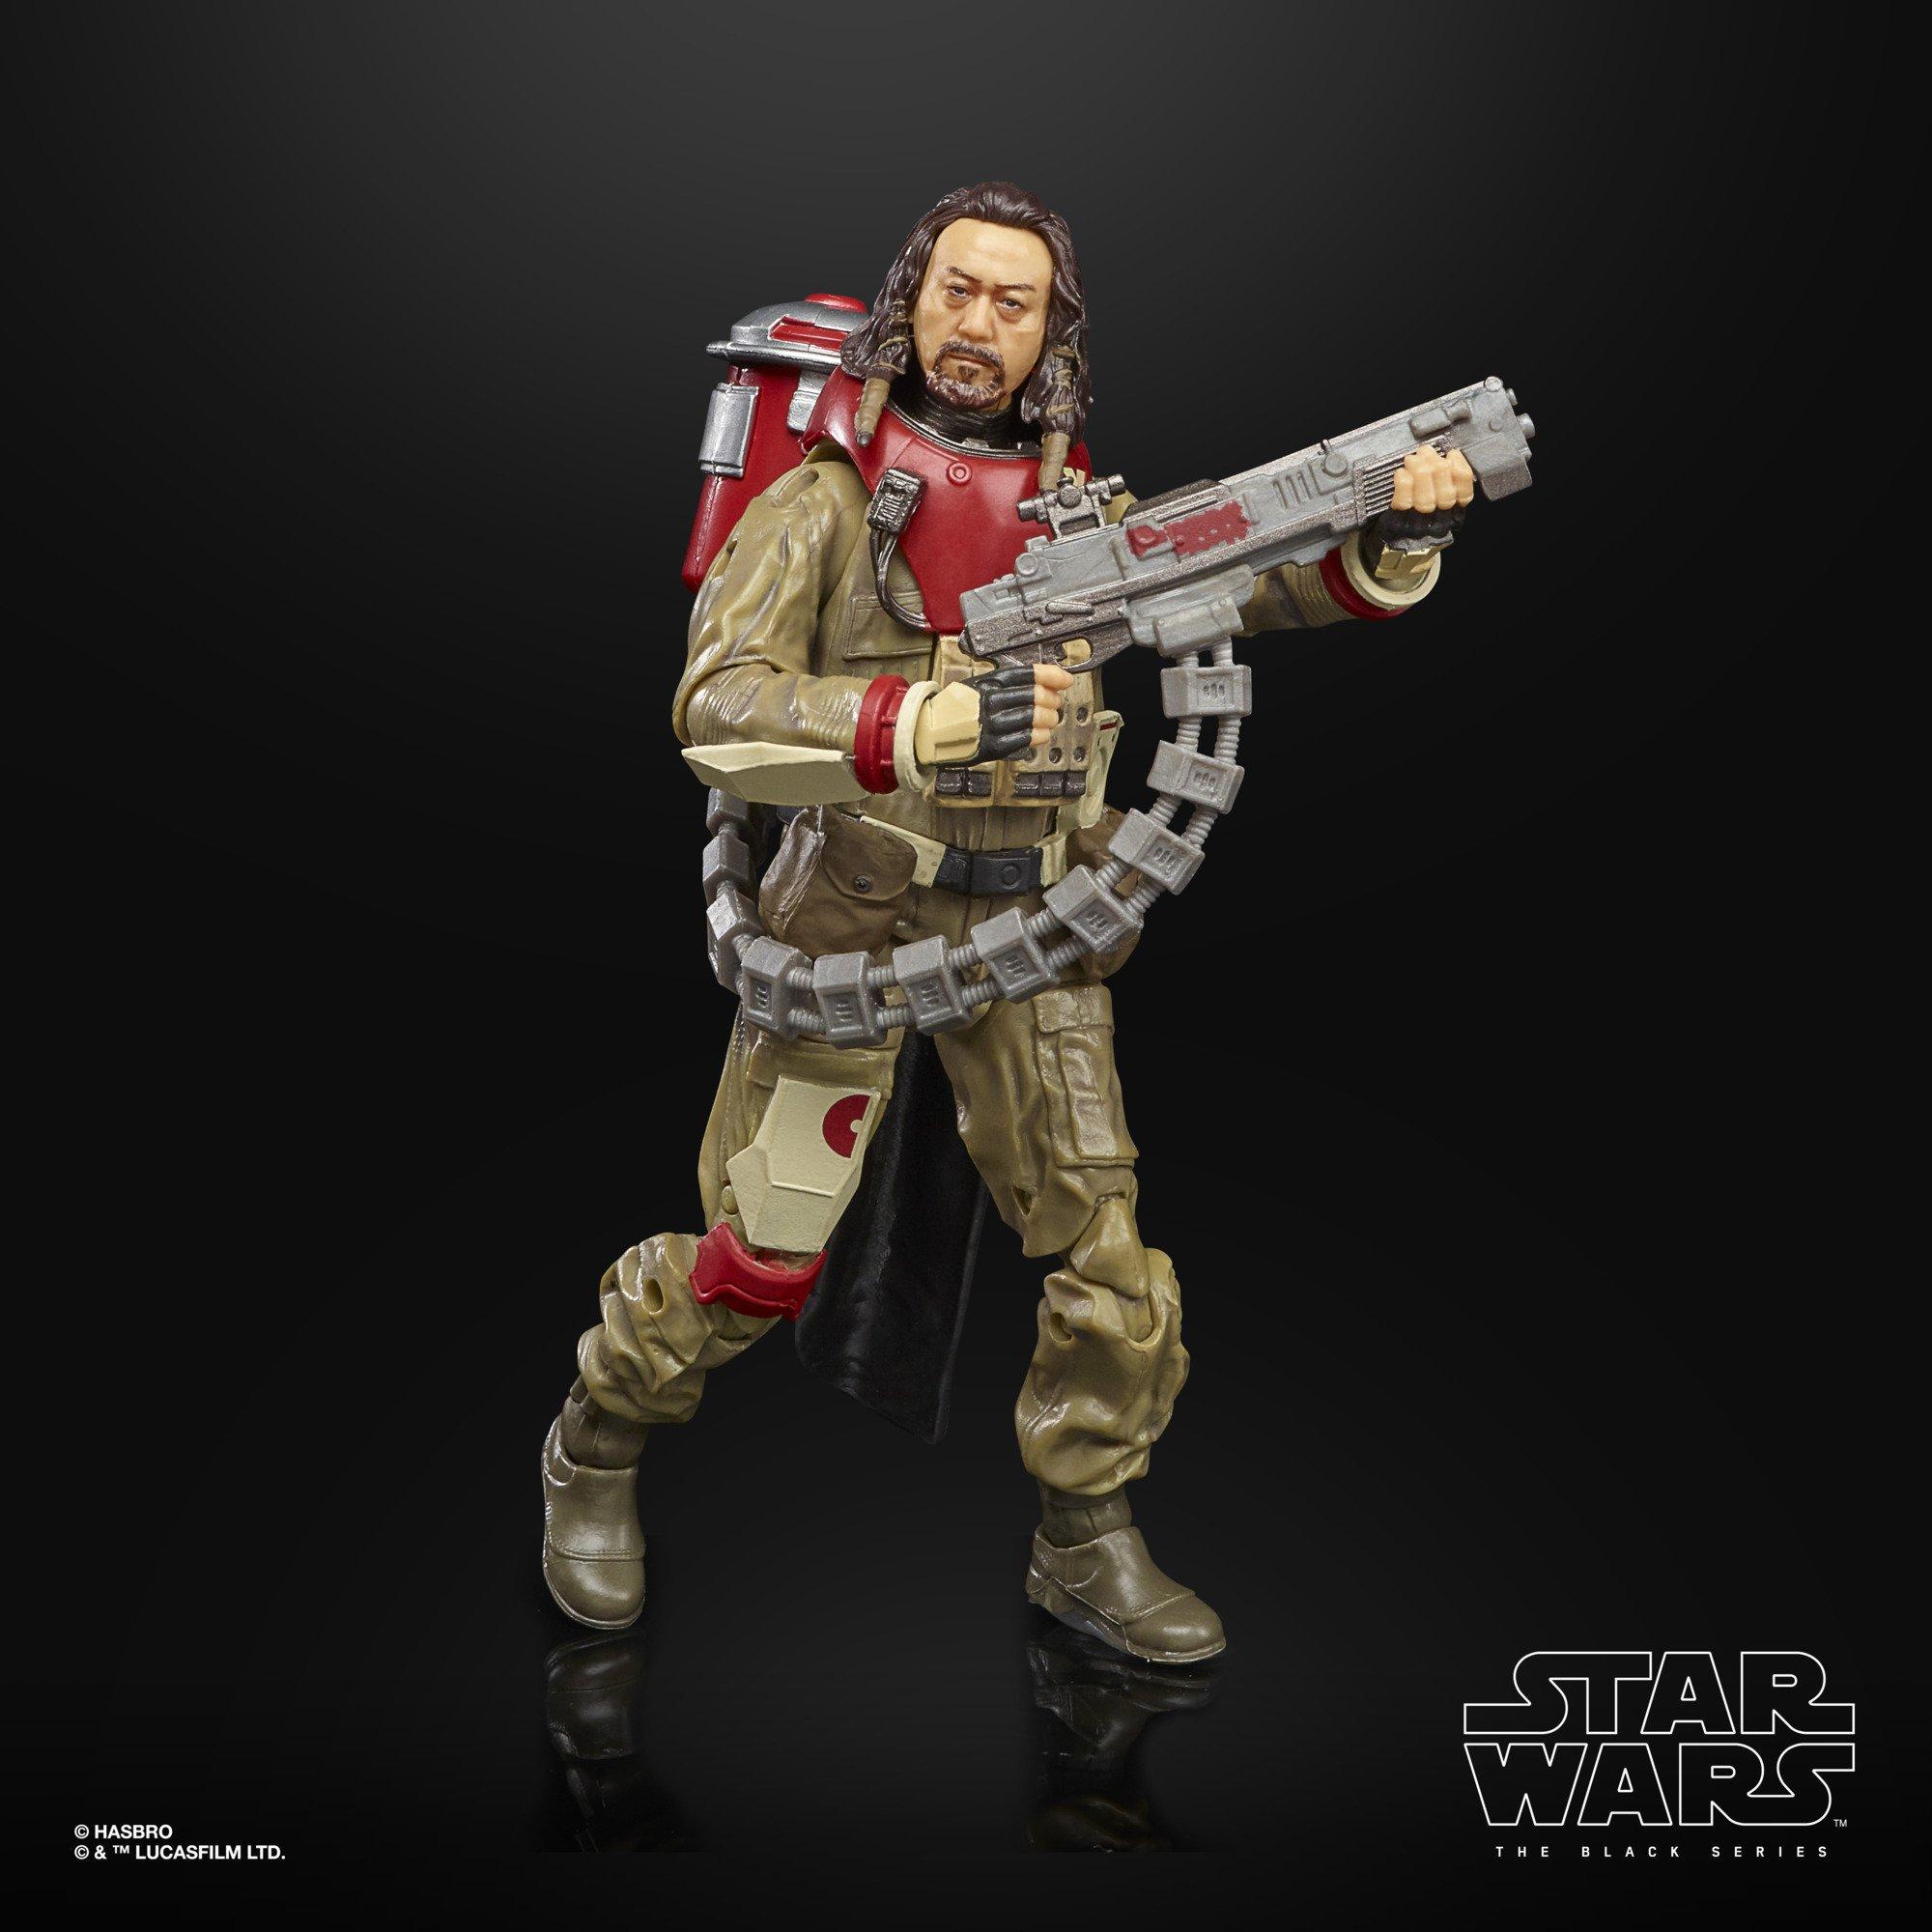 Hasbro Star Wars: The Black Series Rogue One: A Star Wars Story Baze Malbus 6-in Action Figure